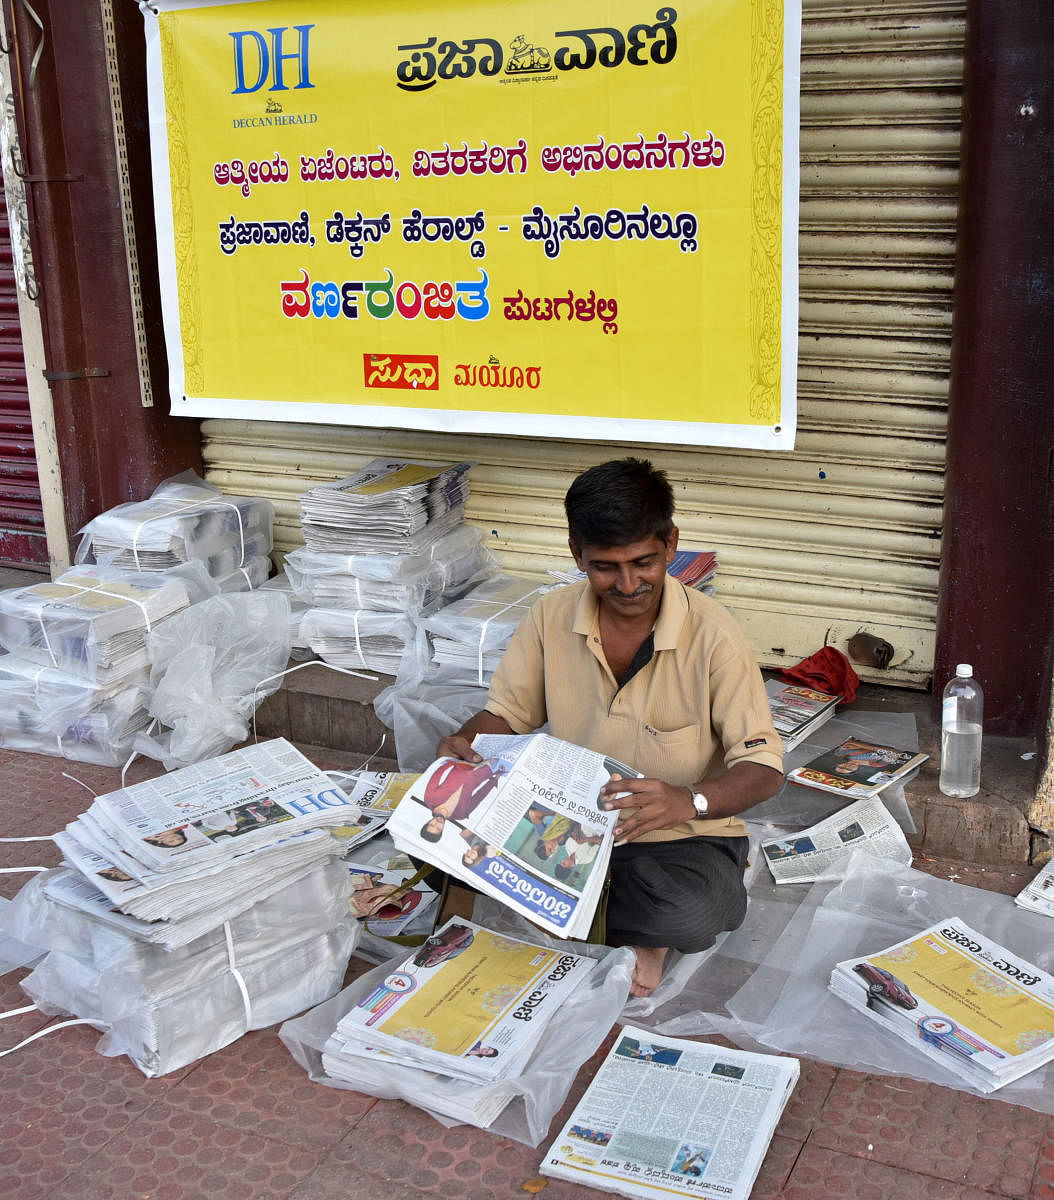 News paper distributors during the launch of new colour pages of Prajavani and Deccan Herald news paper at Devaraja Market in Mysuru on Friday. DH photo